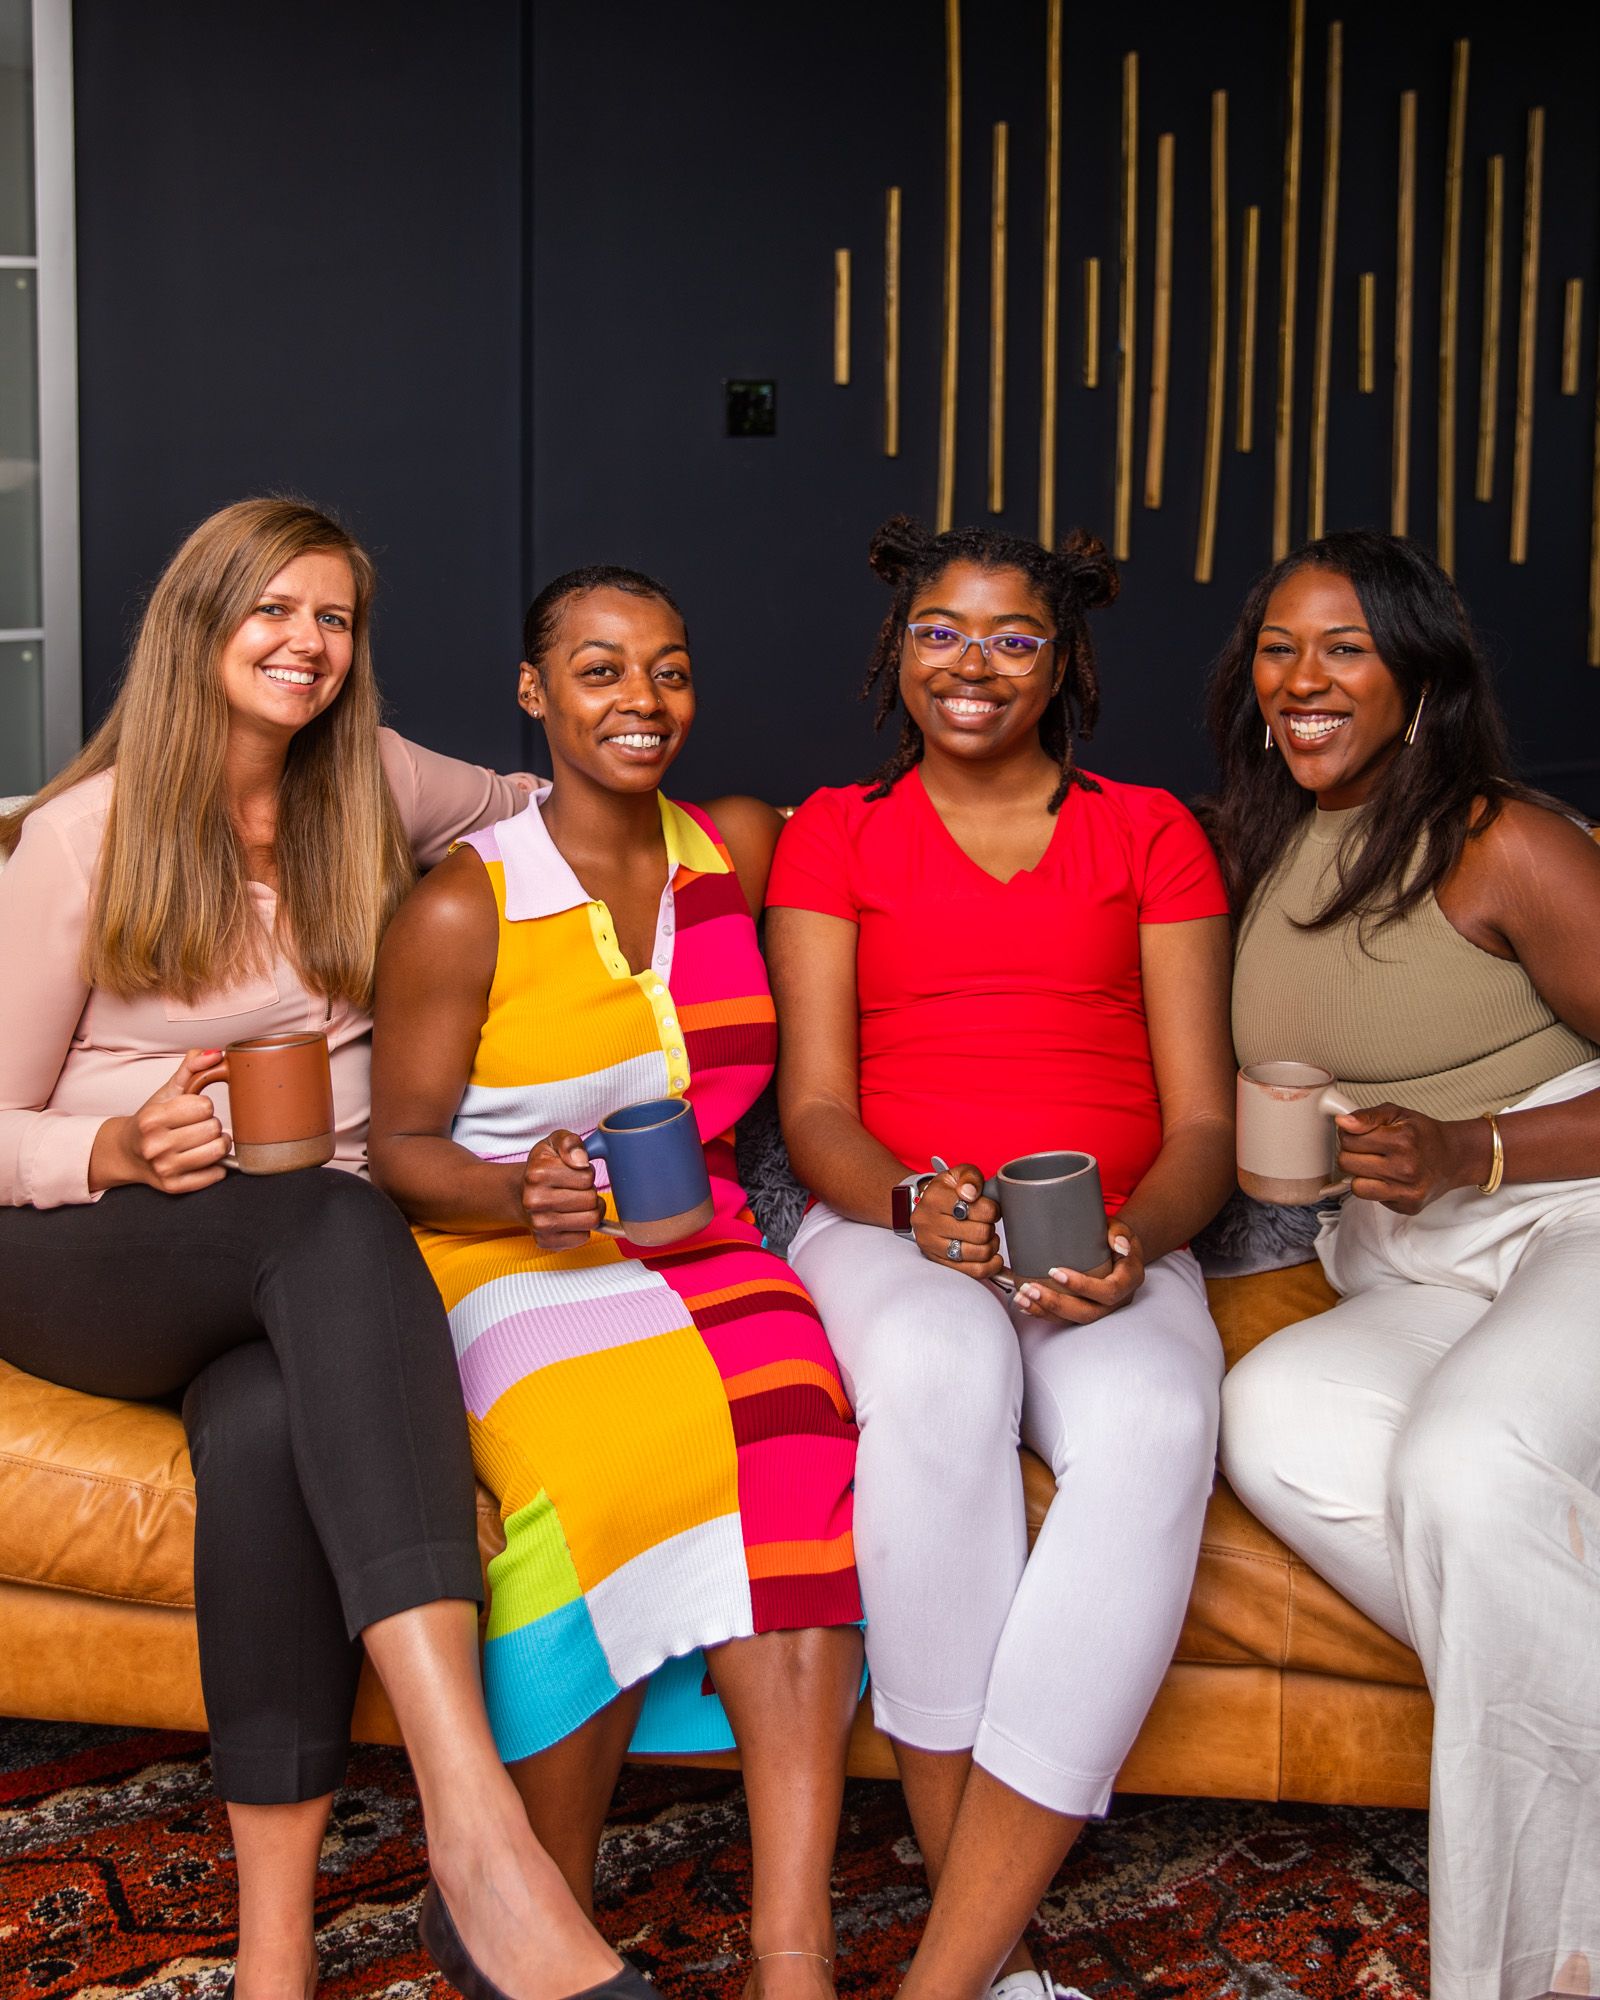 Four people smiling sitting on a light brown leather couch with a black wall background all staring at the camera. Each person is holding a ceramic mug.